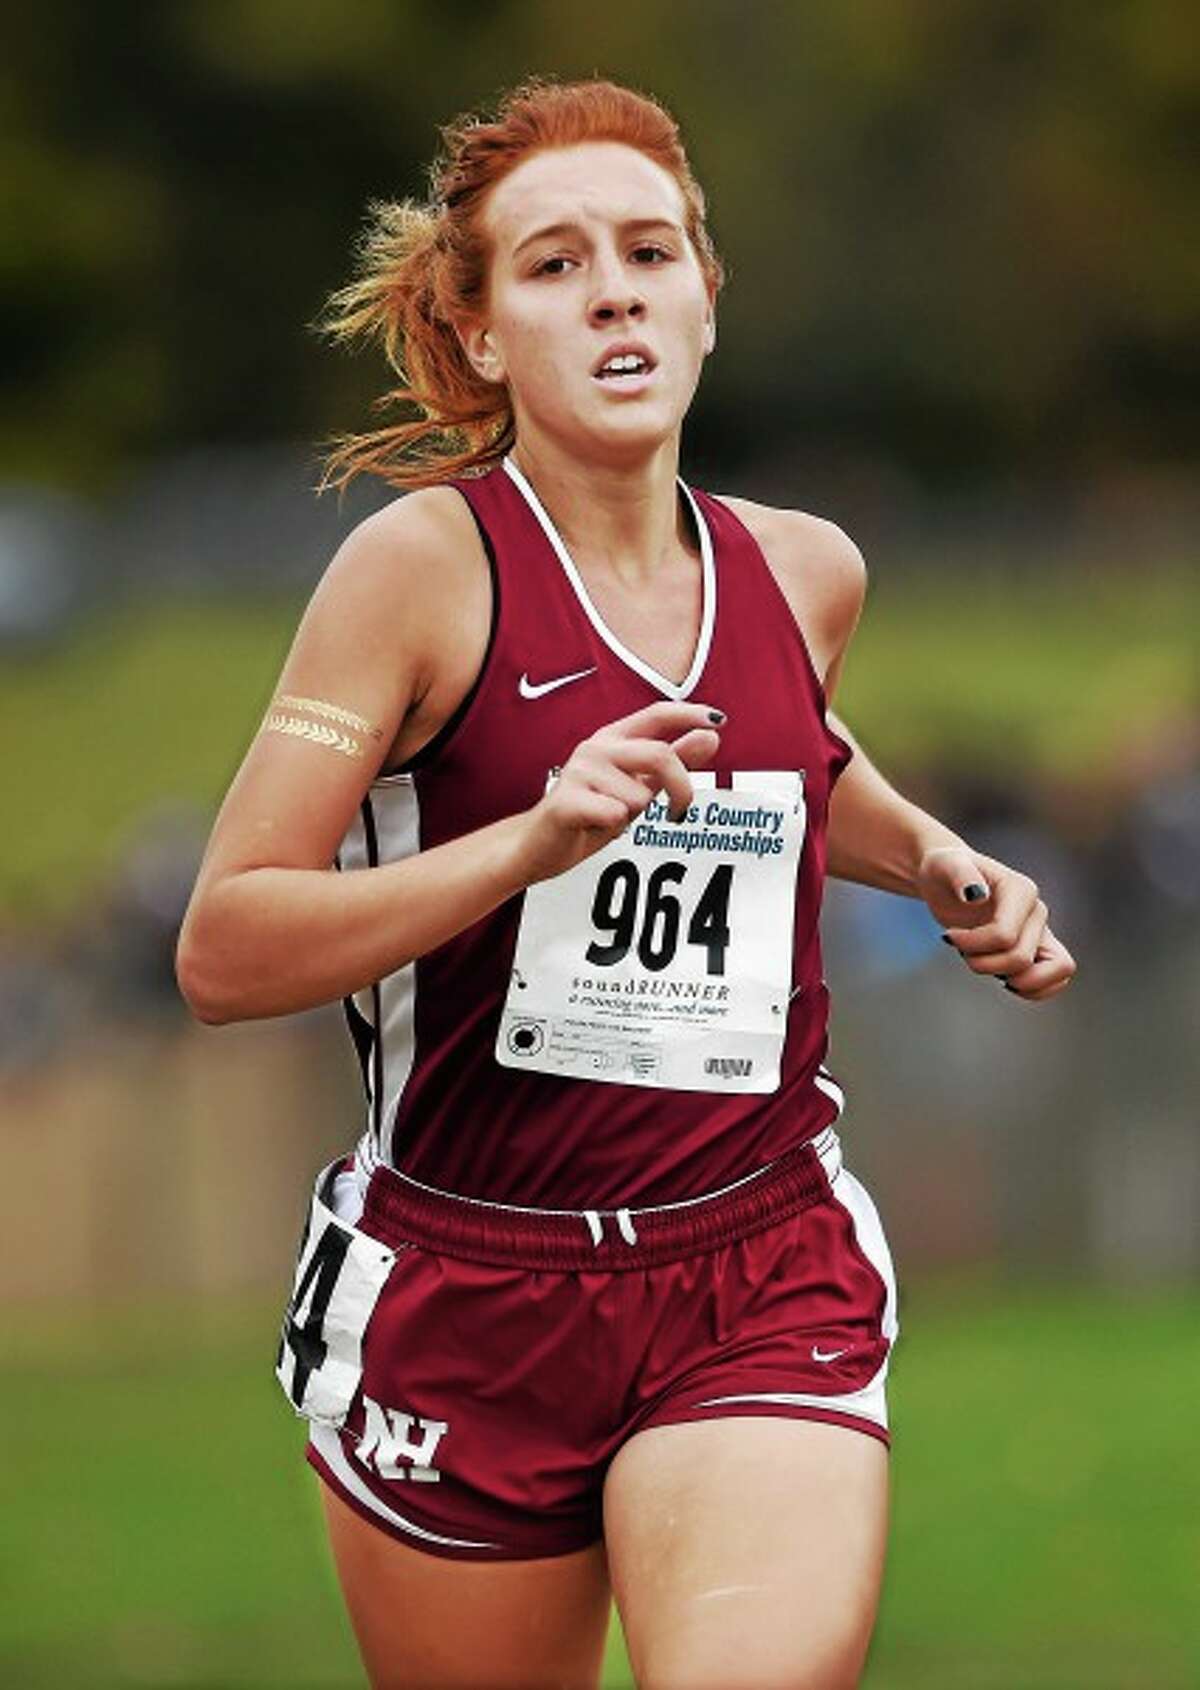 North Haven senior Elise Symon won the girls class MM race in 19:52 at the CIAC cross country state championships, Saturday at Wickham Park in Manchester. (Catherine Avalone/New Haven Register)